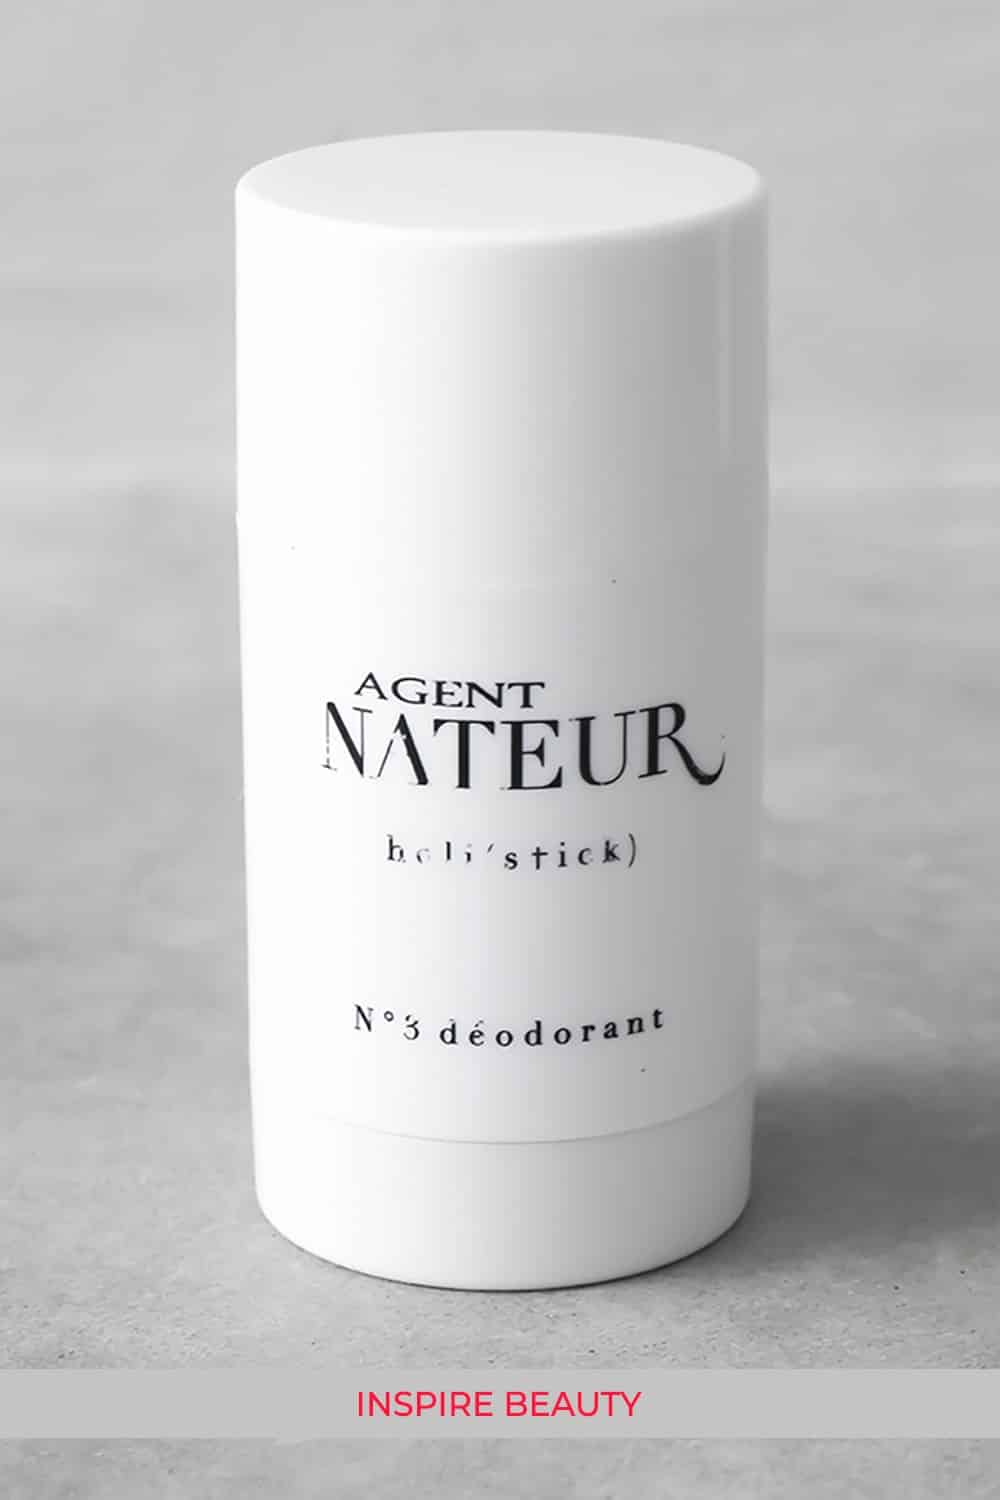 Agent Nateur Holi(Stick) No.3 Deodorant review that is all natural deodorant with a fresh eucalyptus scent that controls body odour naturally